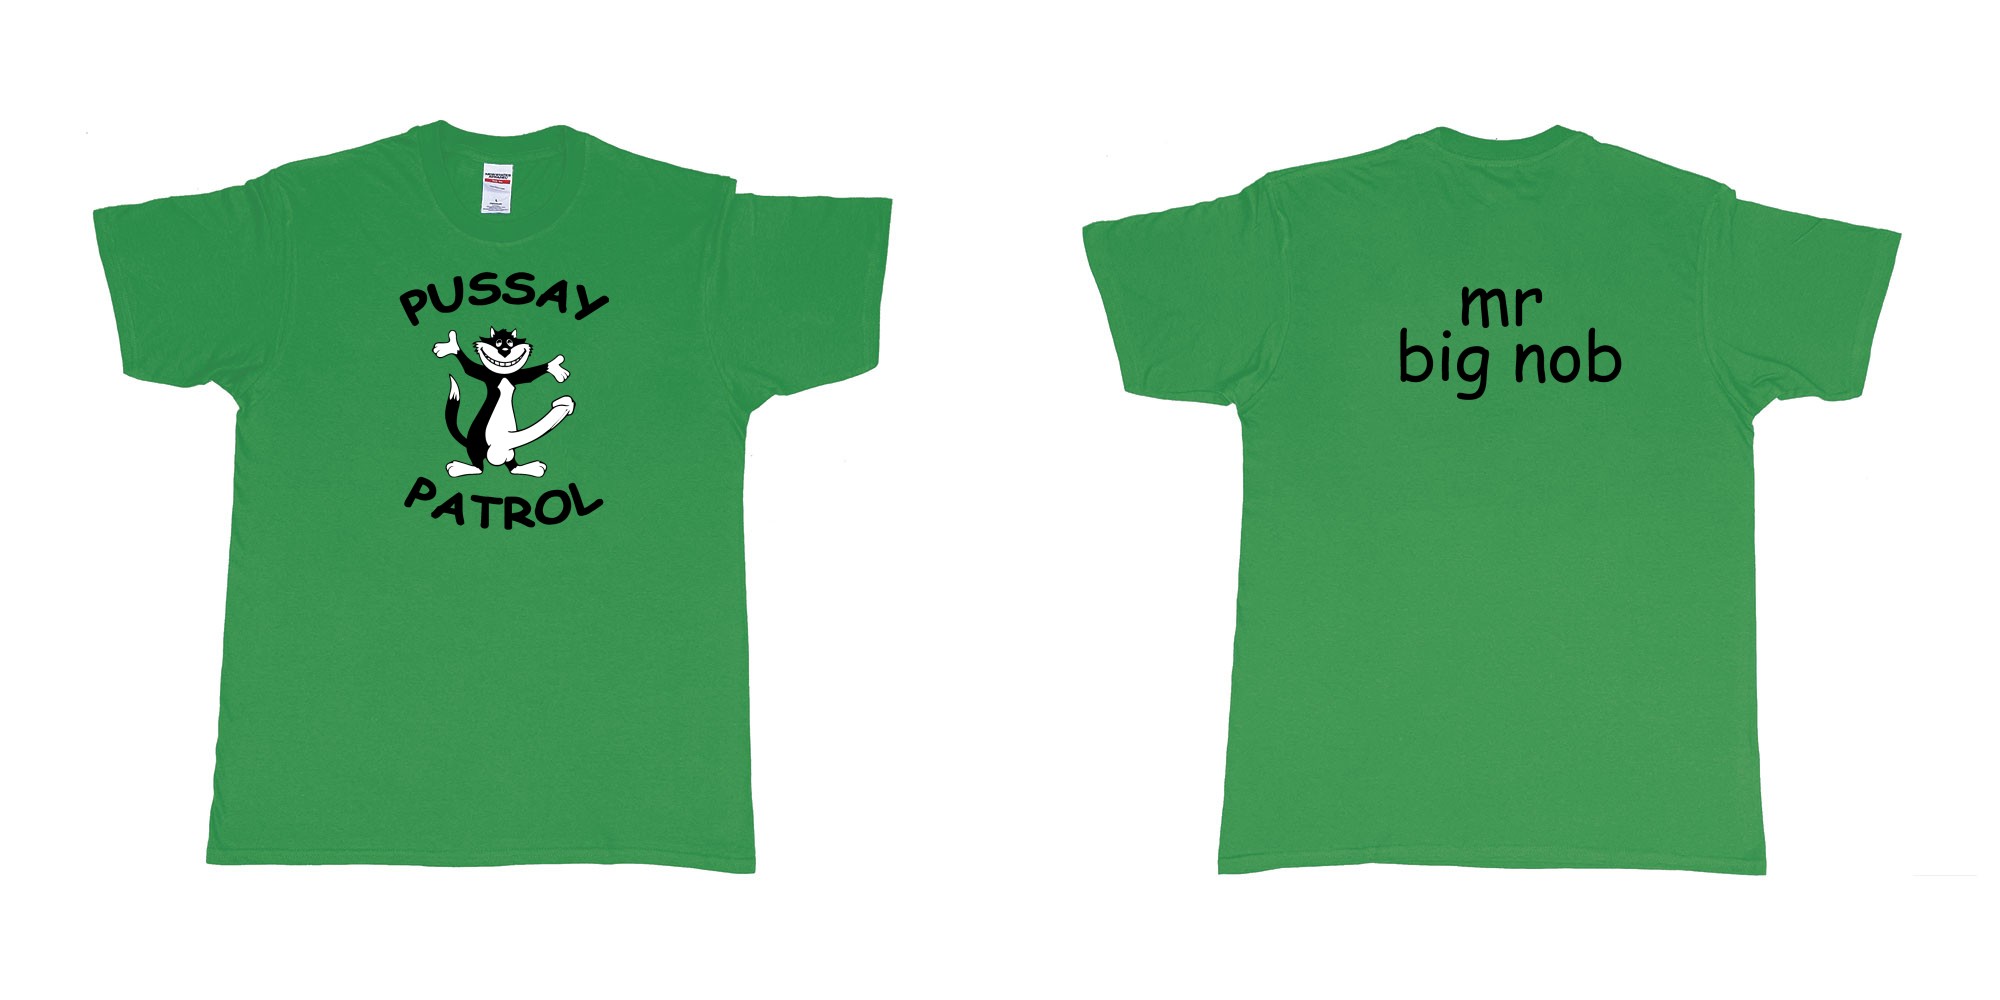 Custom tshirt design TPW Pussay Patrol in fabric color irish-green choice your own text made in Bali by The Pirate Way